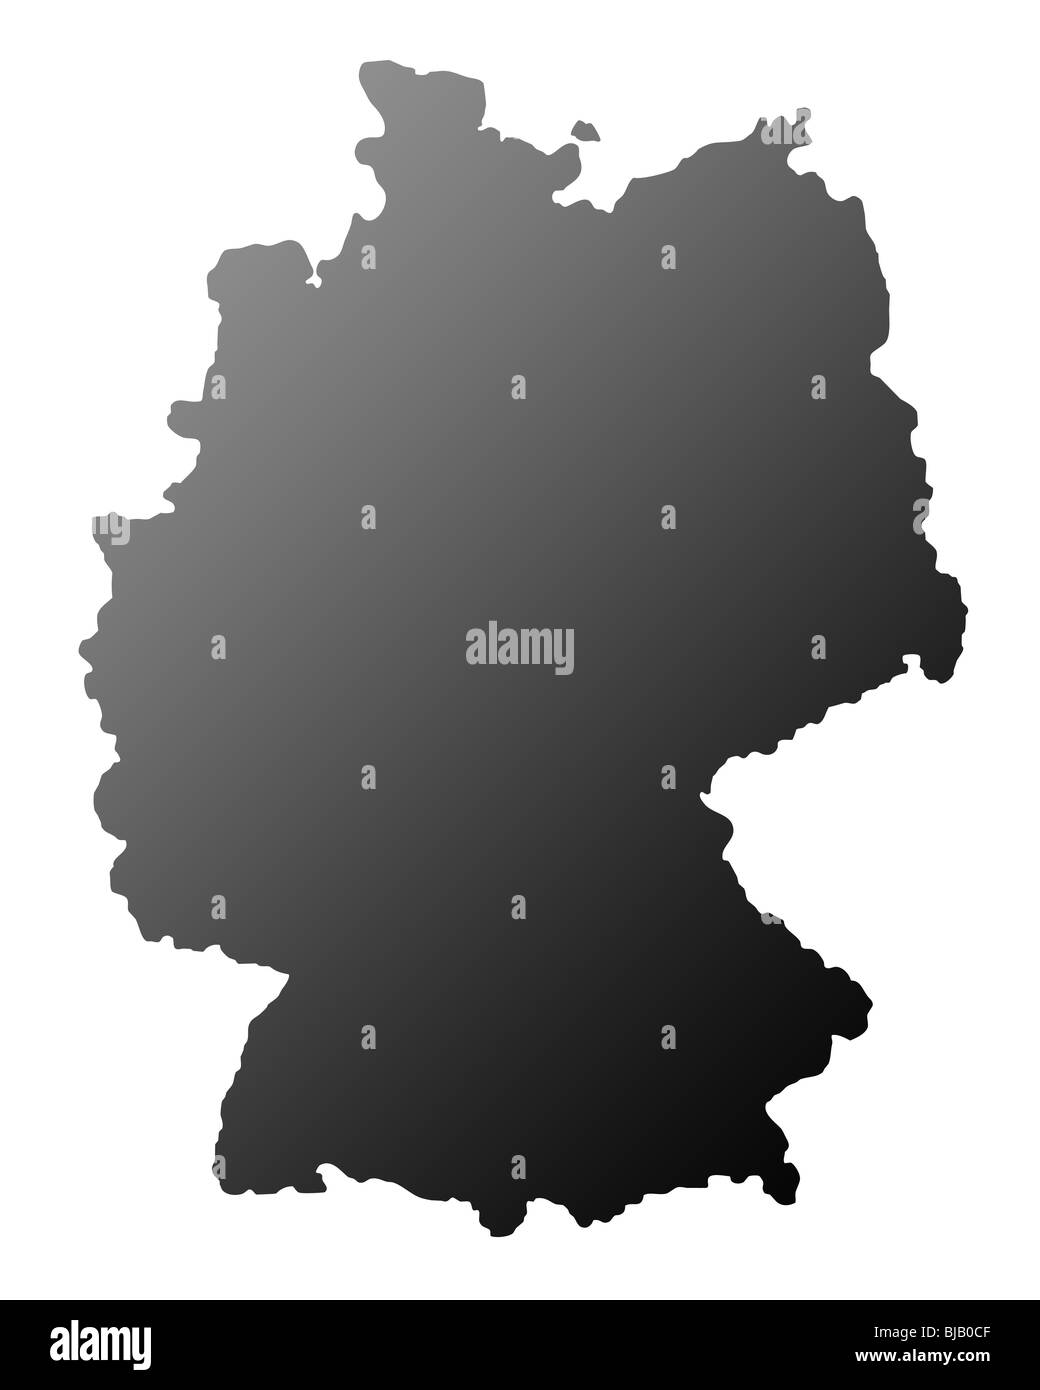 Silhouetted map of Germany, isolated on white background. Stock Photo